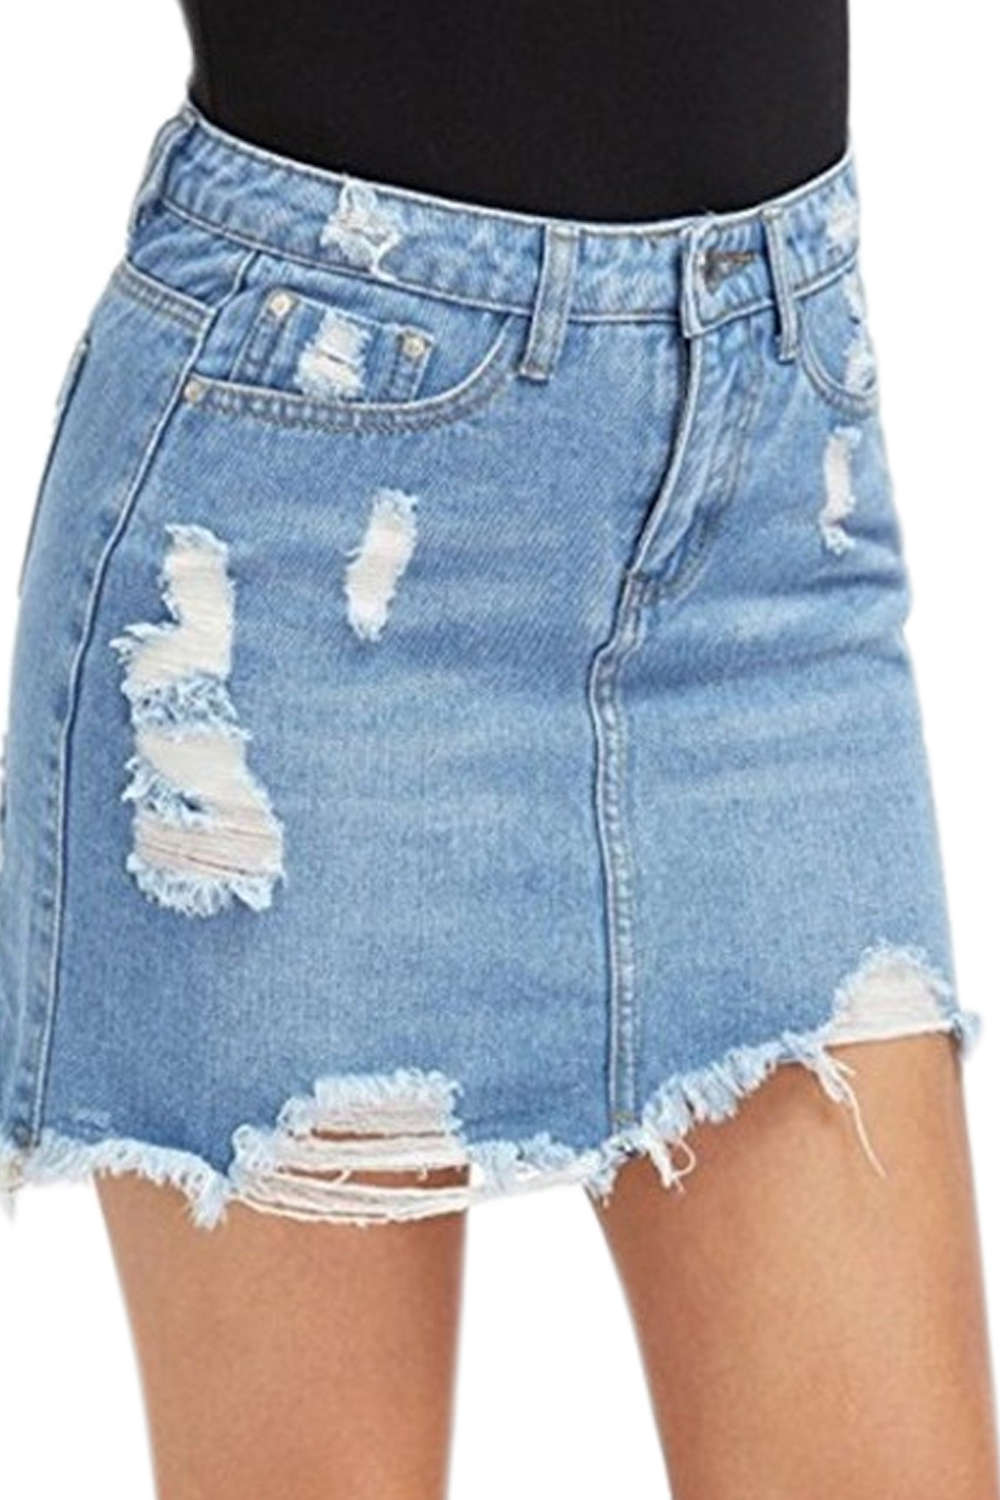 Iyasson Women's Casual Distressed Ripped A-Line Denim Skirt